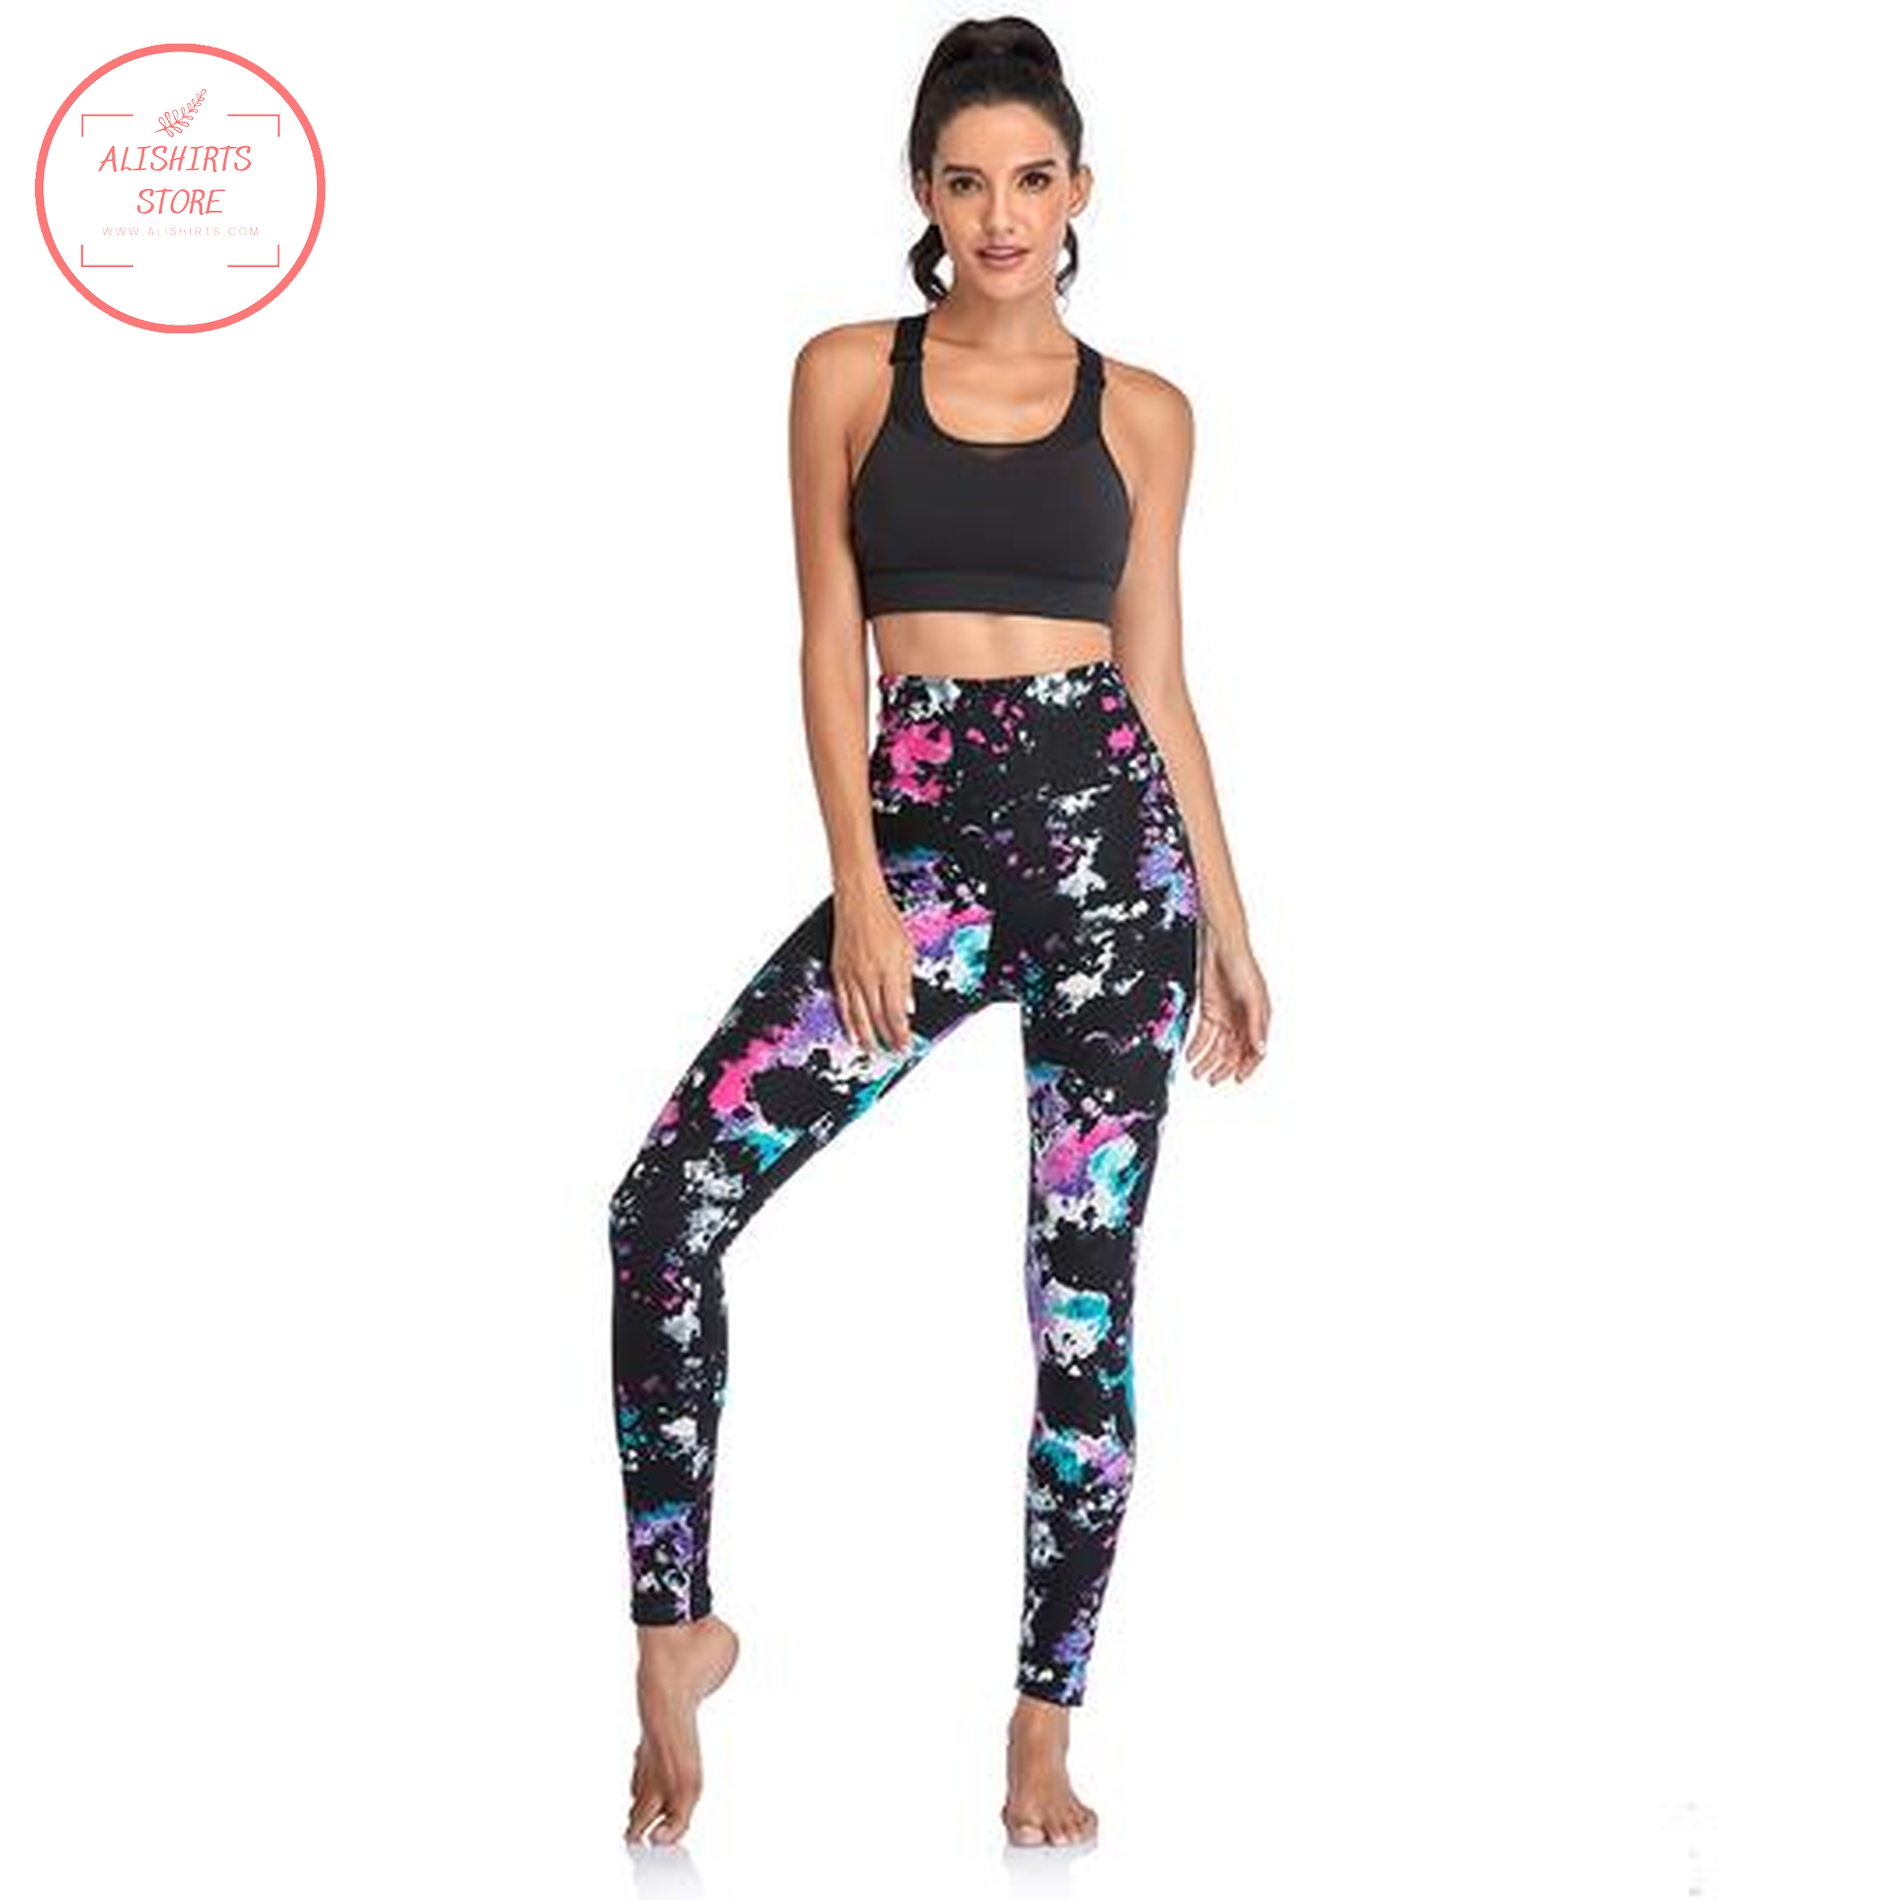 Blue and Pink camo legging